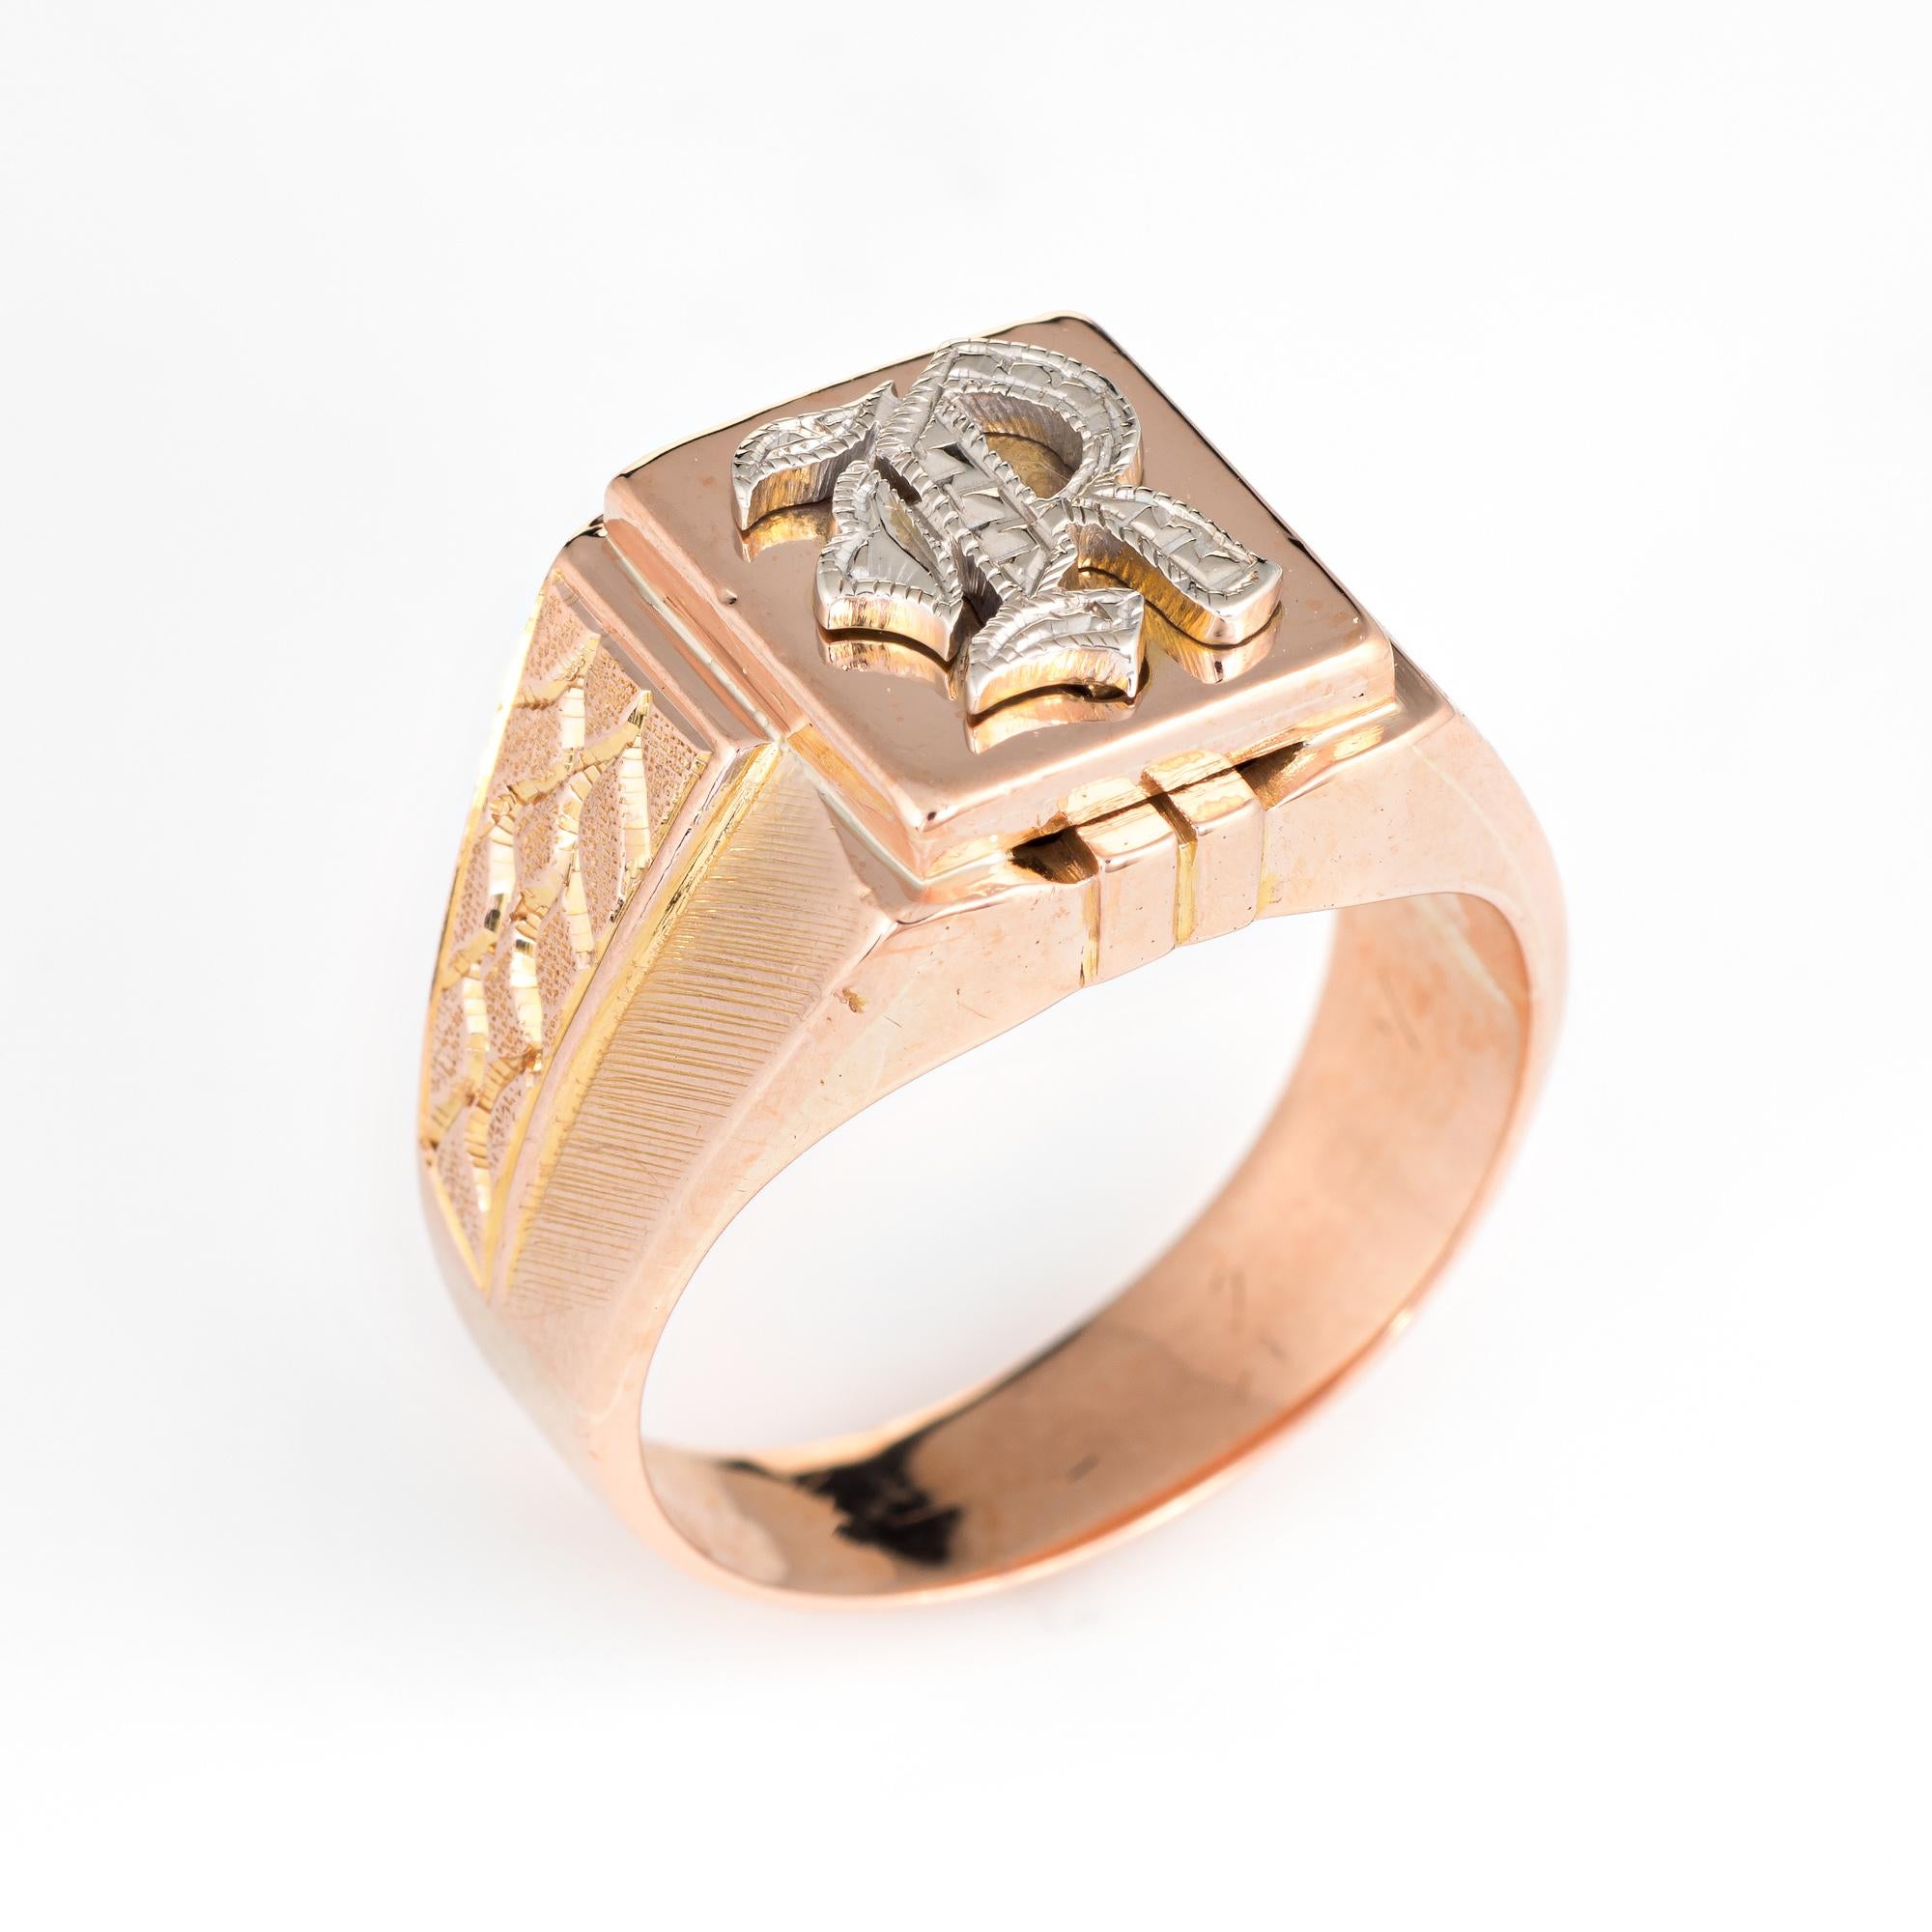 Vintage men's letter 'R' signet ring (circa 1960s to 1970s), crafted in 10 karat rose gold. 

The letter 'R' is rendered in old English font (white gold). The side shoulders feature a textured pebble style design in opposing form. With a medium rise